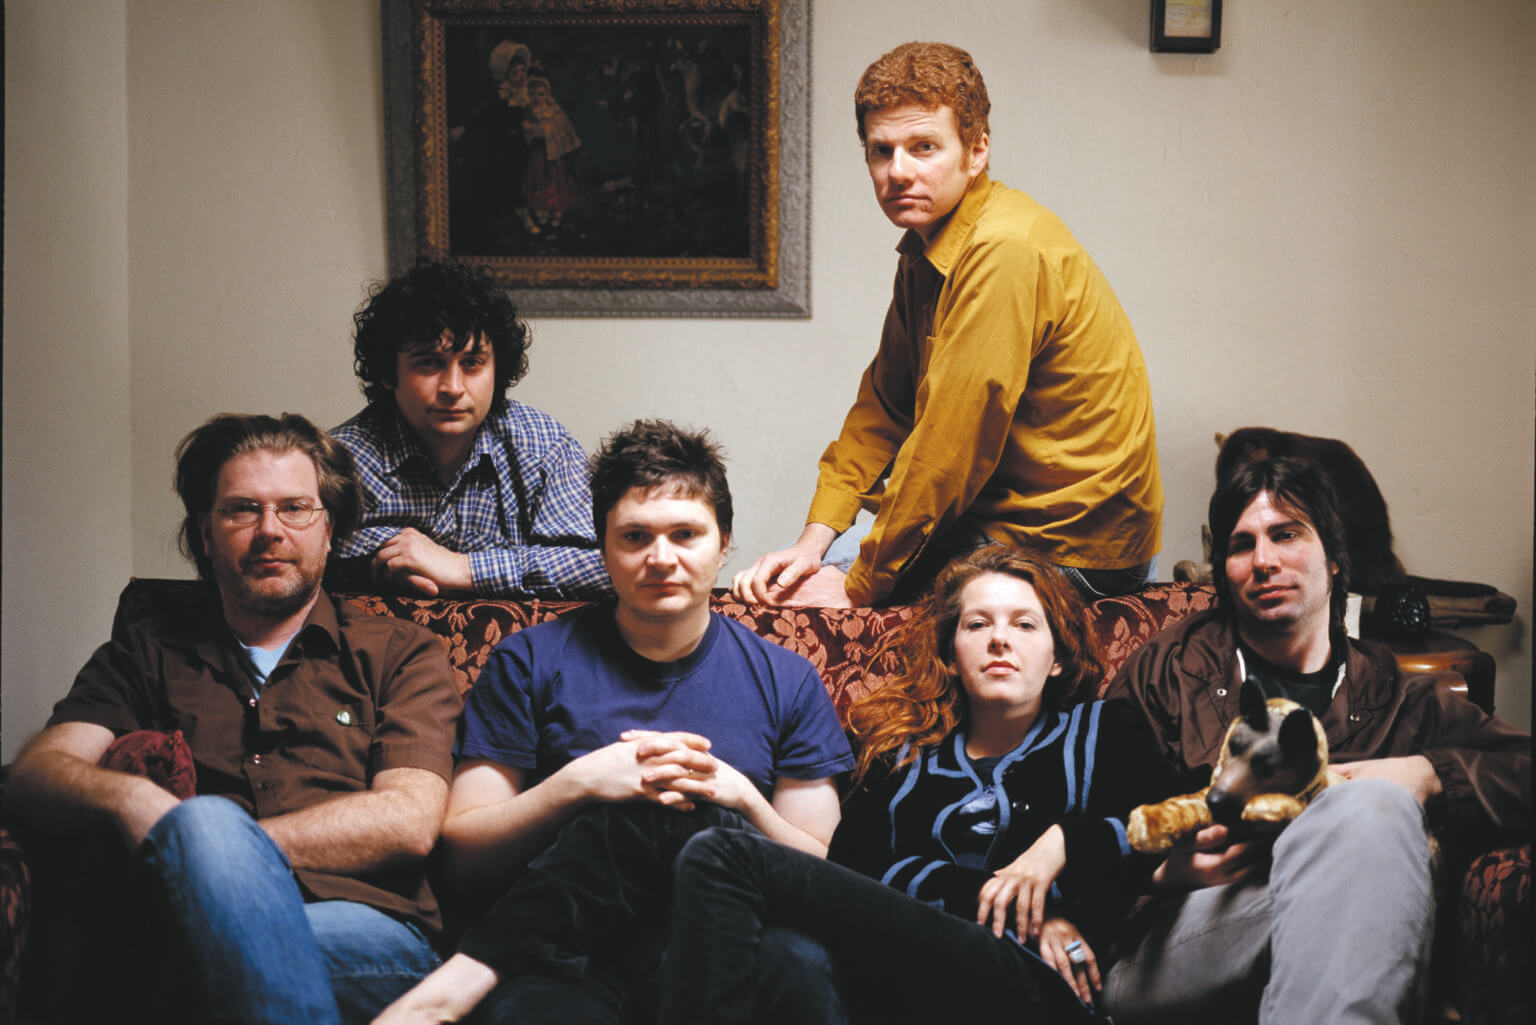 Matador Records is celebrating the 20th anniversary of The New Pornographers’ album Electric Version, with a limited-edition release